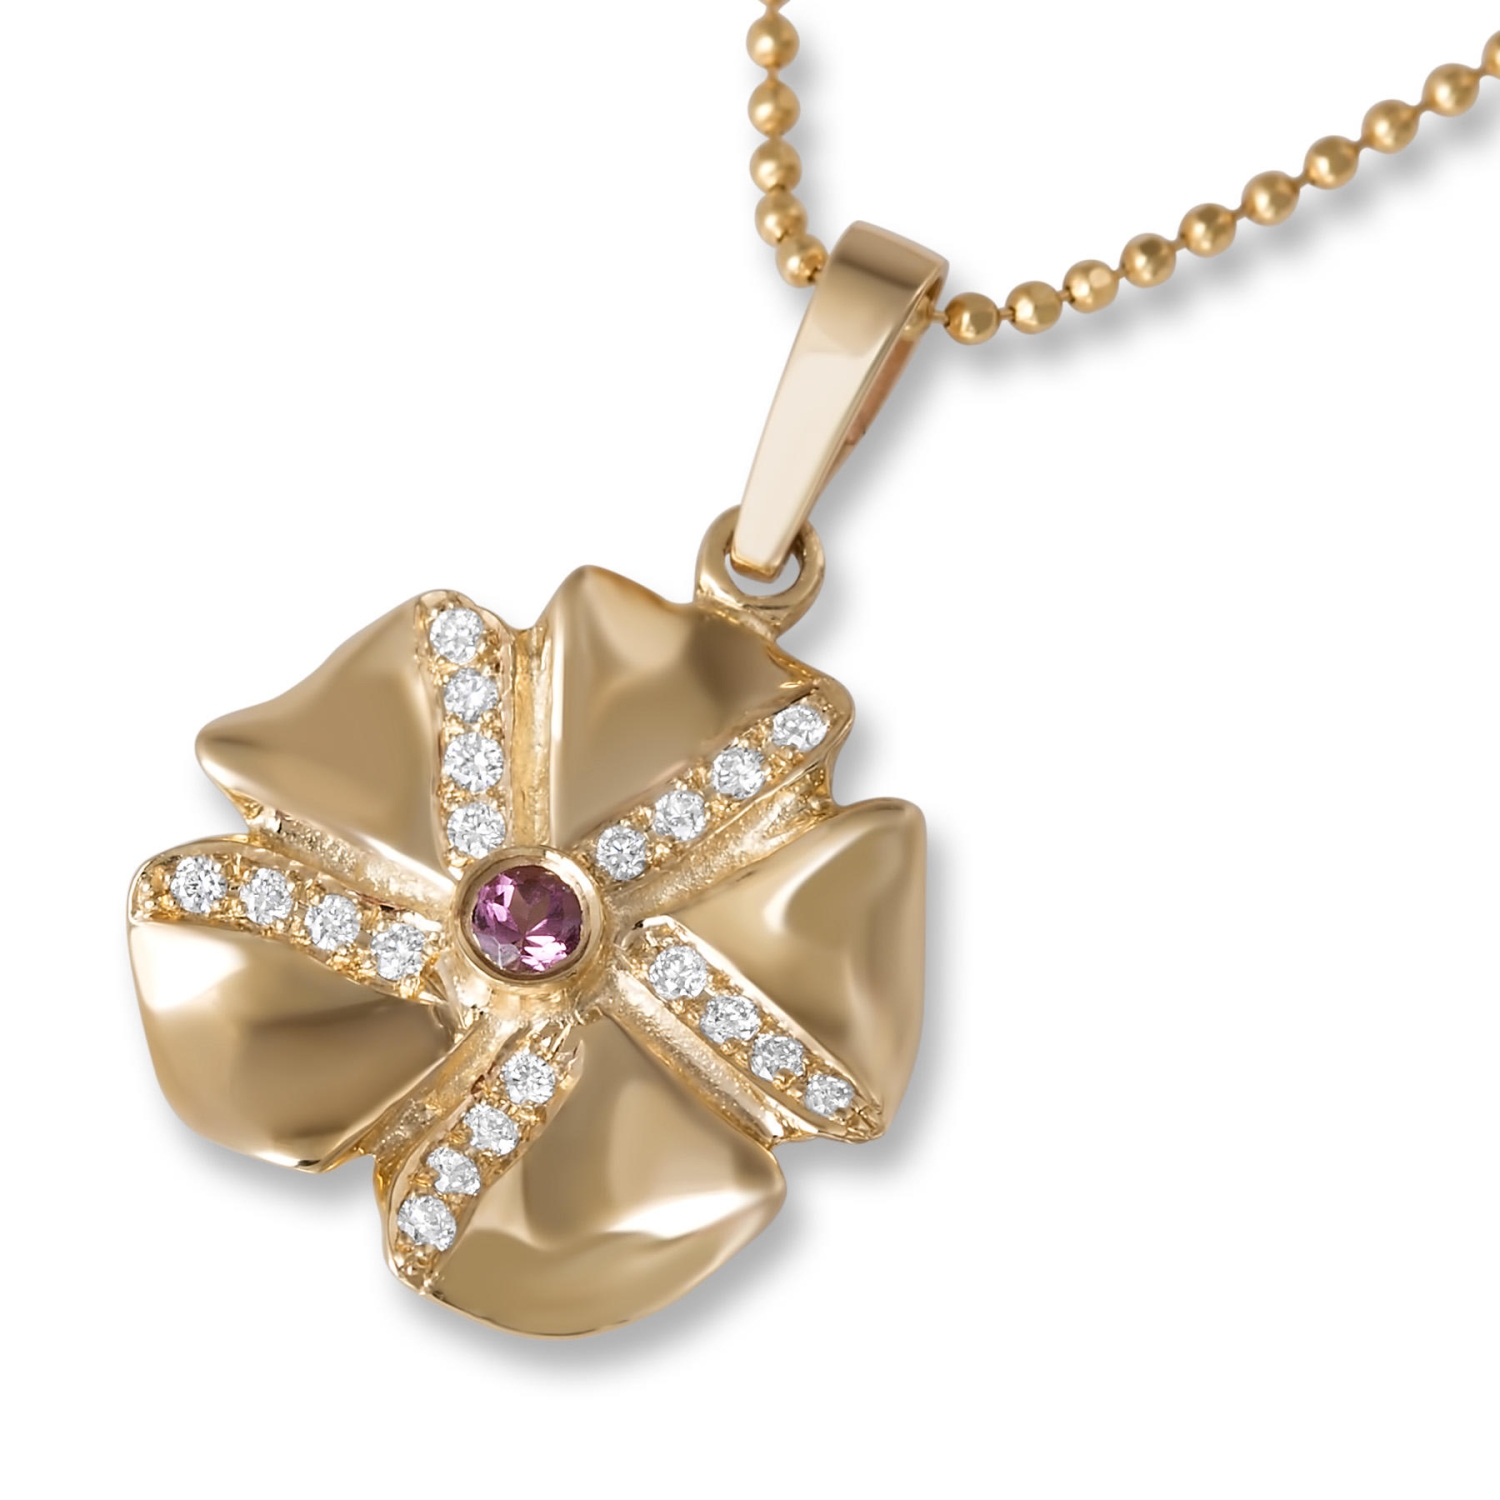 14K Gold Flower Pendant with Diamond Petals and Pink Sapphire Center - 1